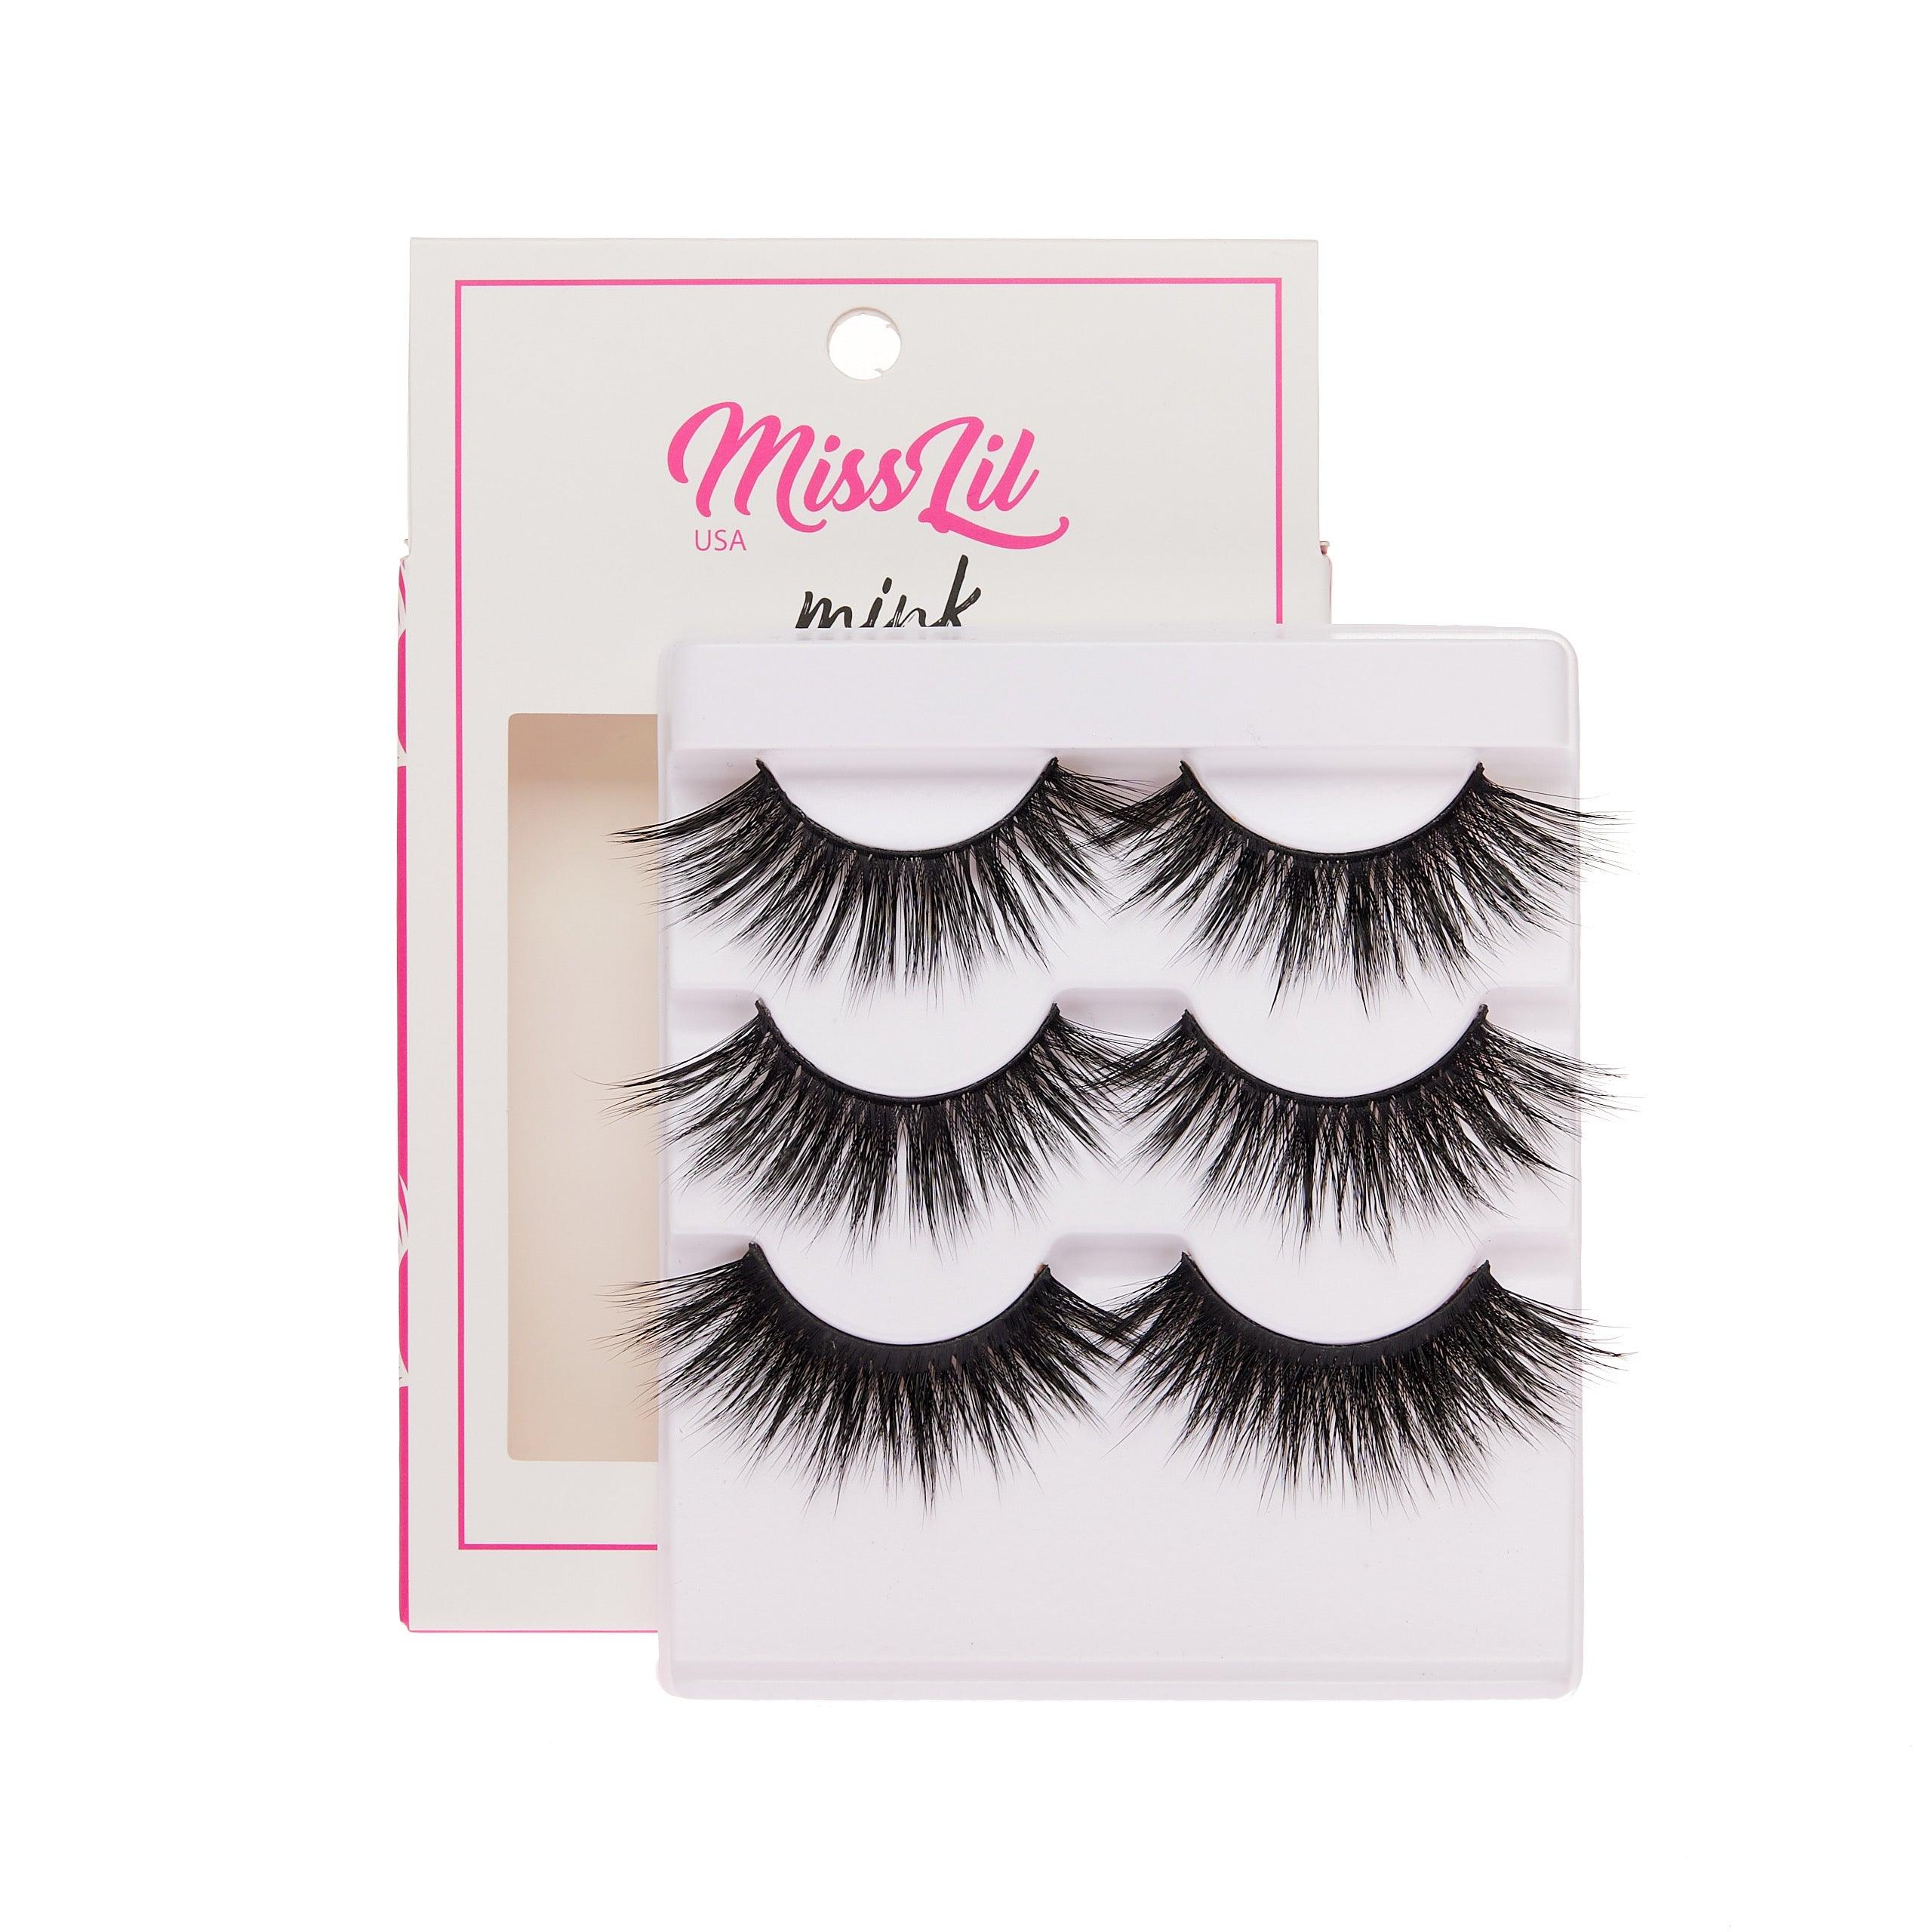 3-Pair Faux Mink Effect Eyelashes - Lash Party Collection #24 - 3 Pack 